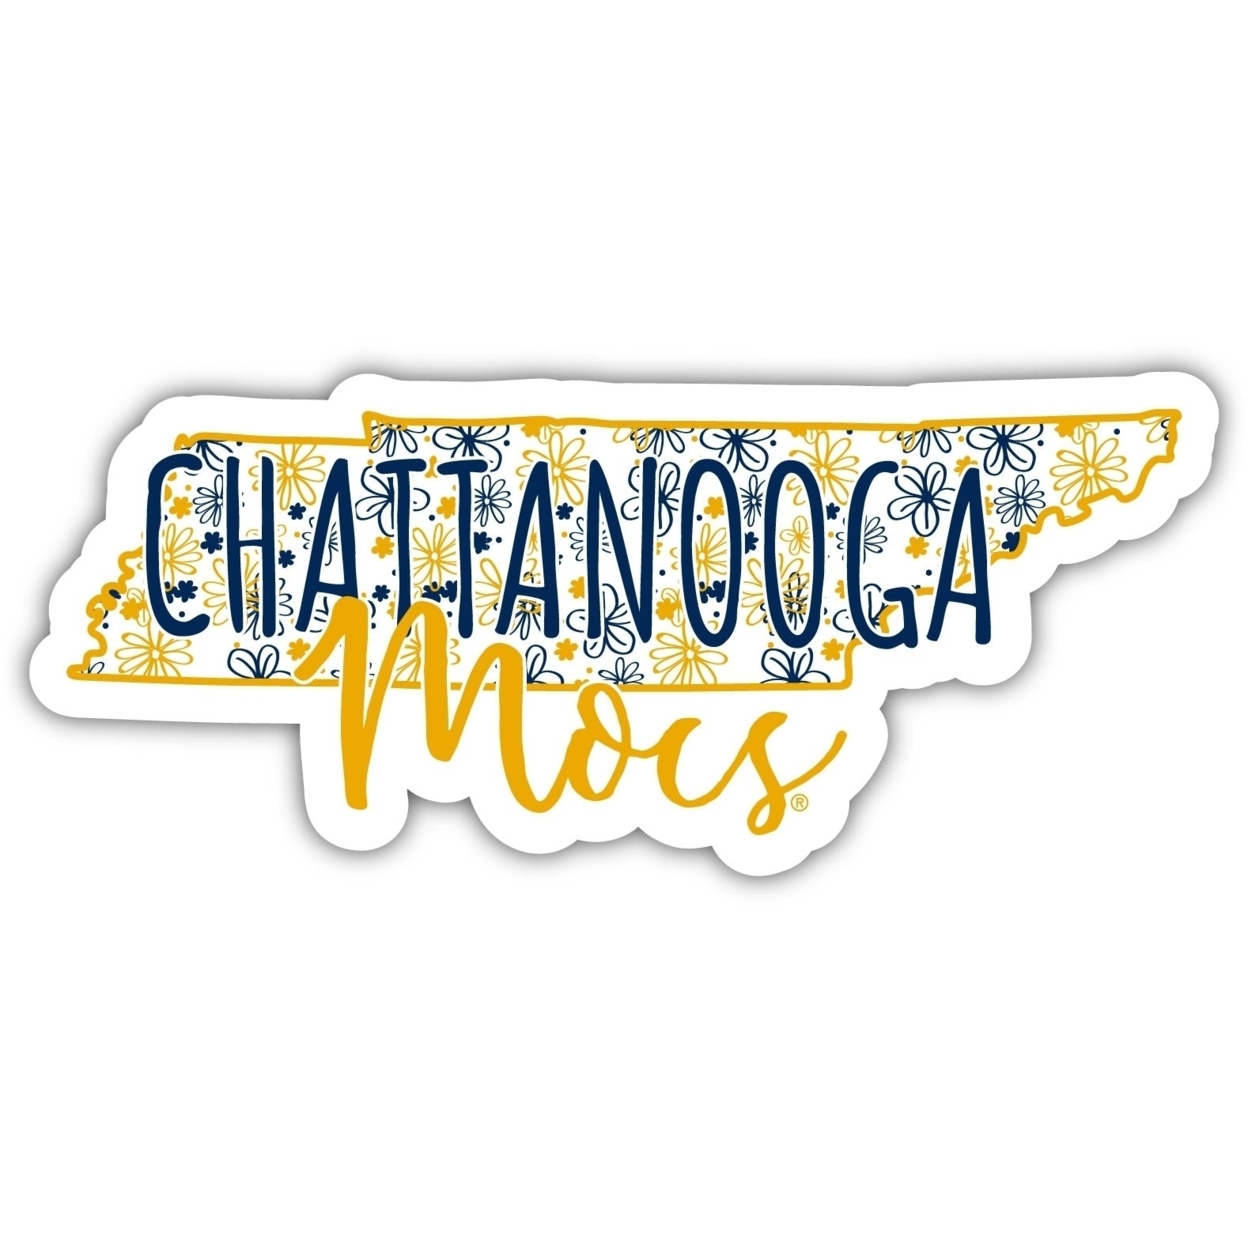 University Of Tennessee At Chattanooga Floral State Die Cut Decal 2-Inch